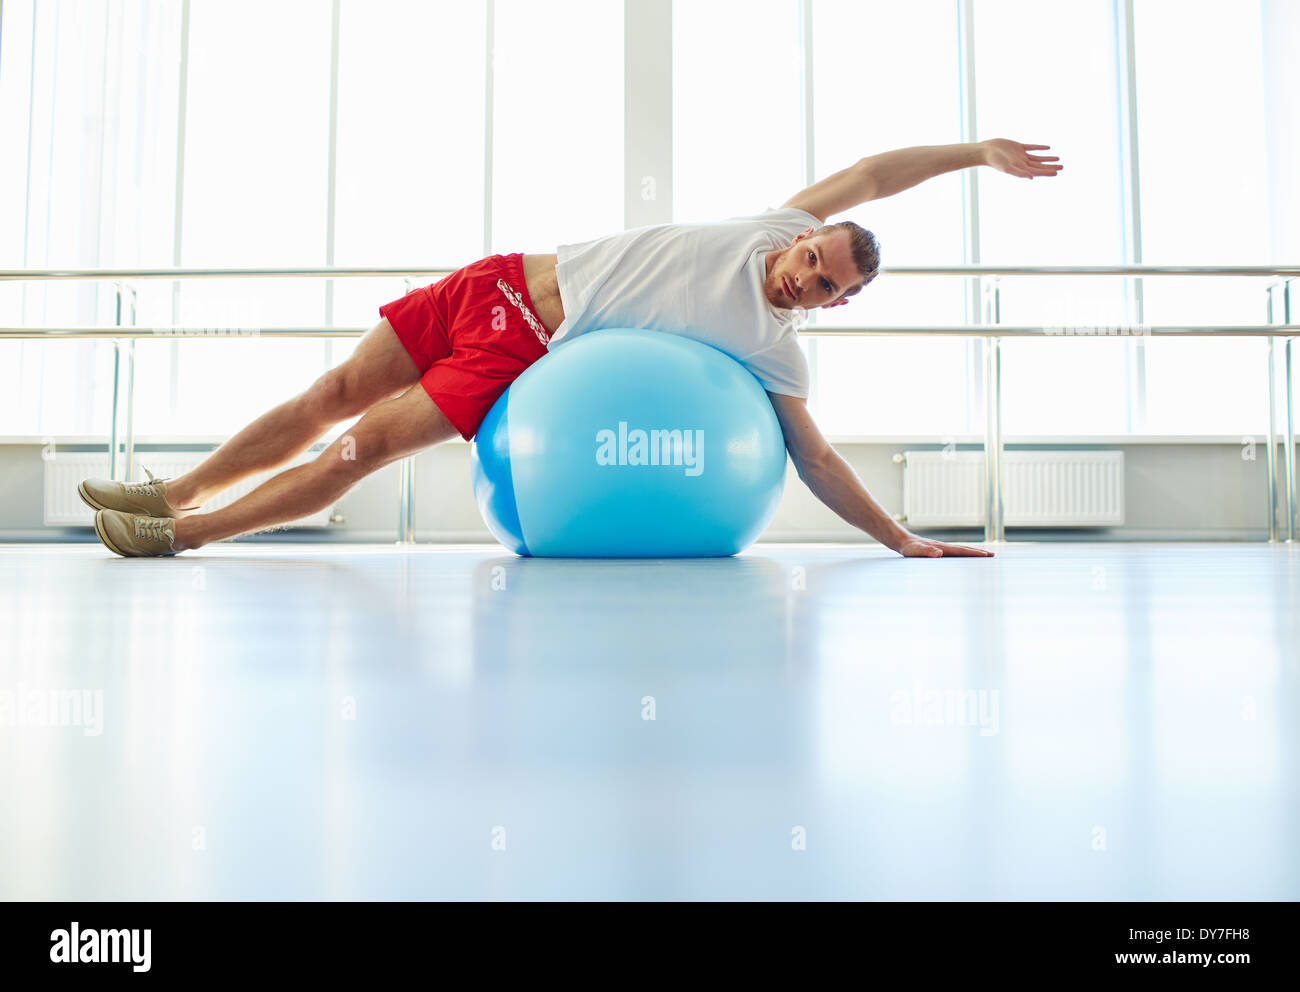 guy stretching on gym ball stock